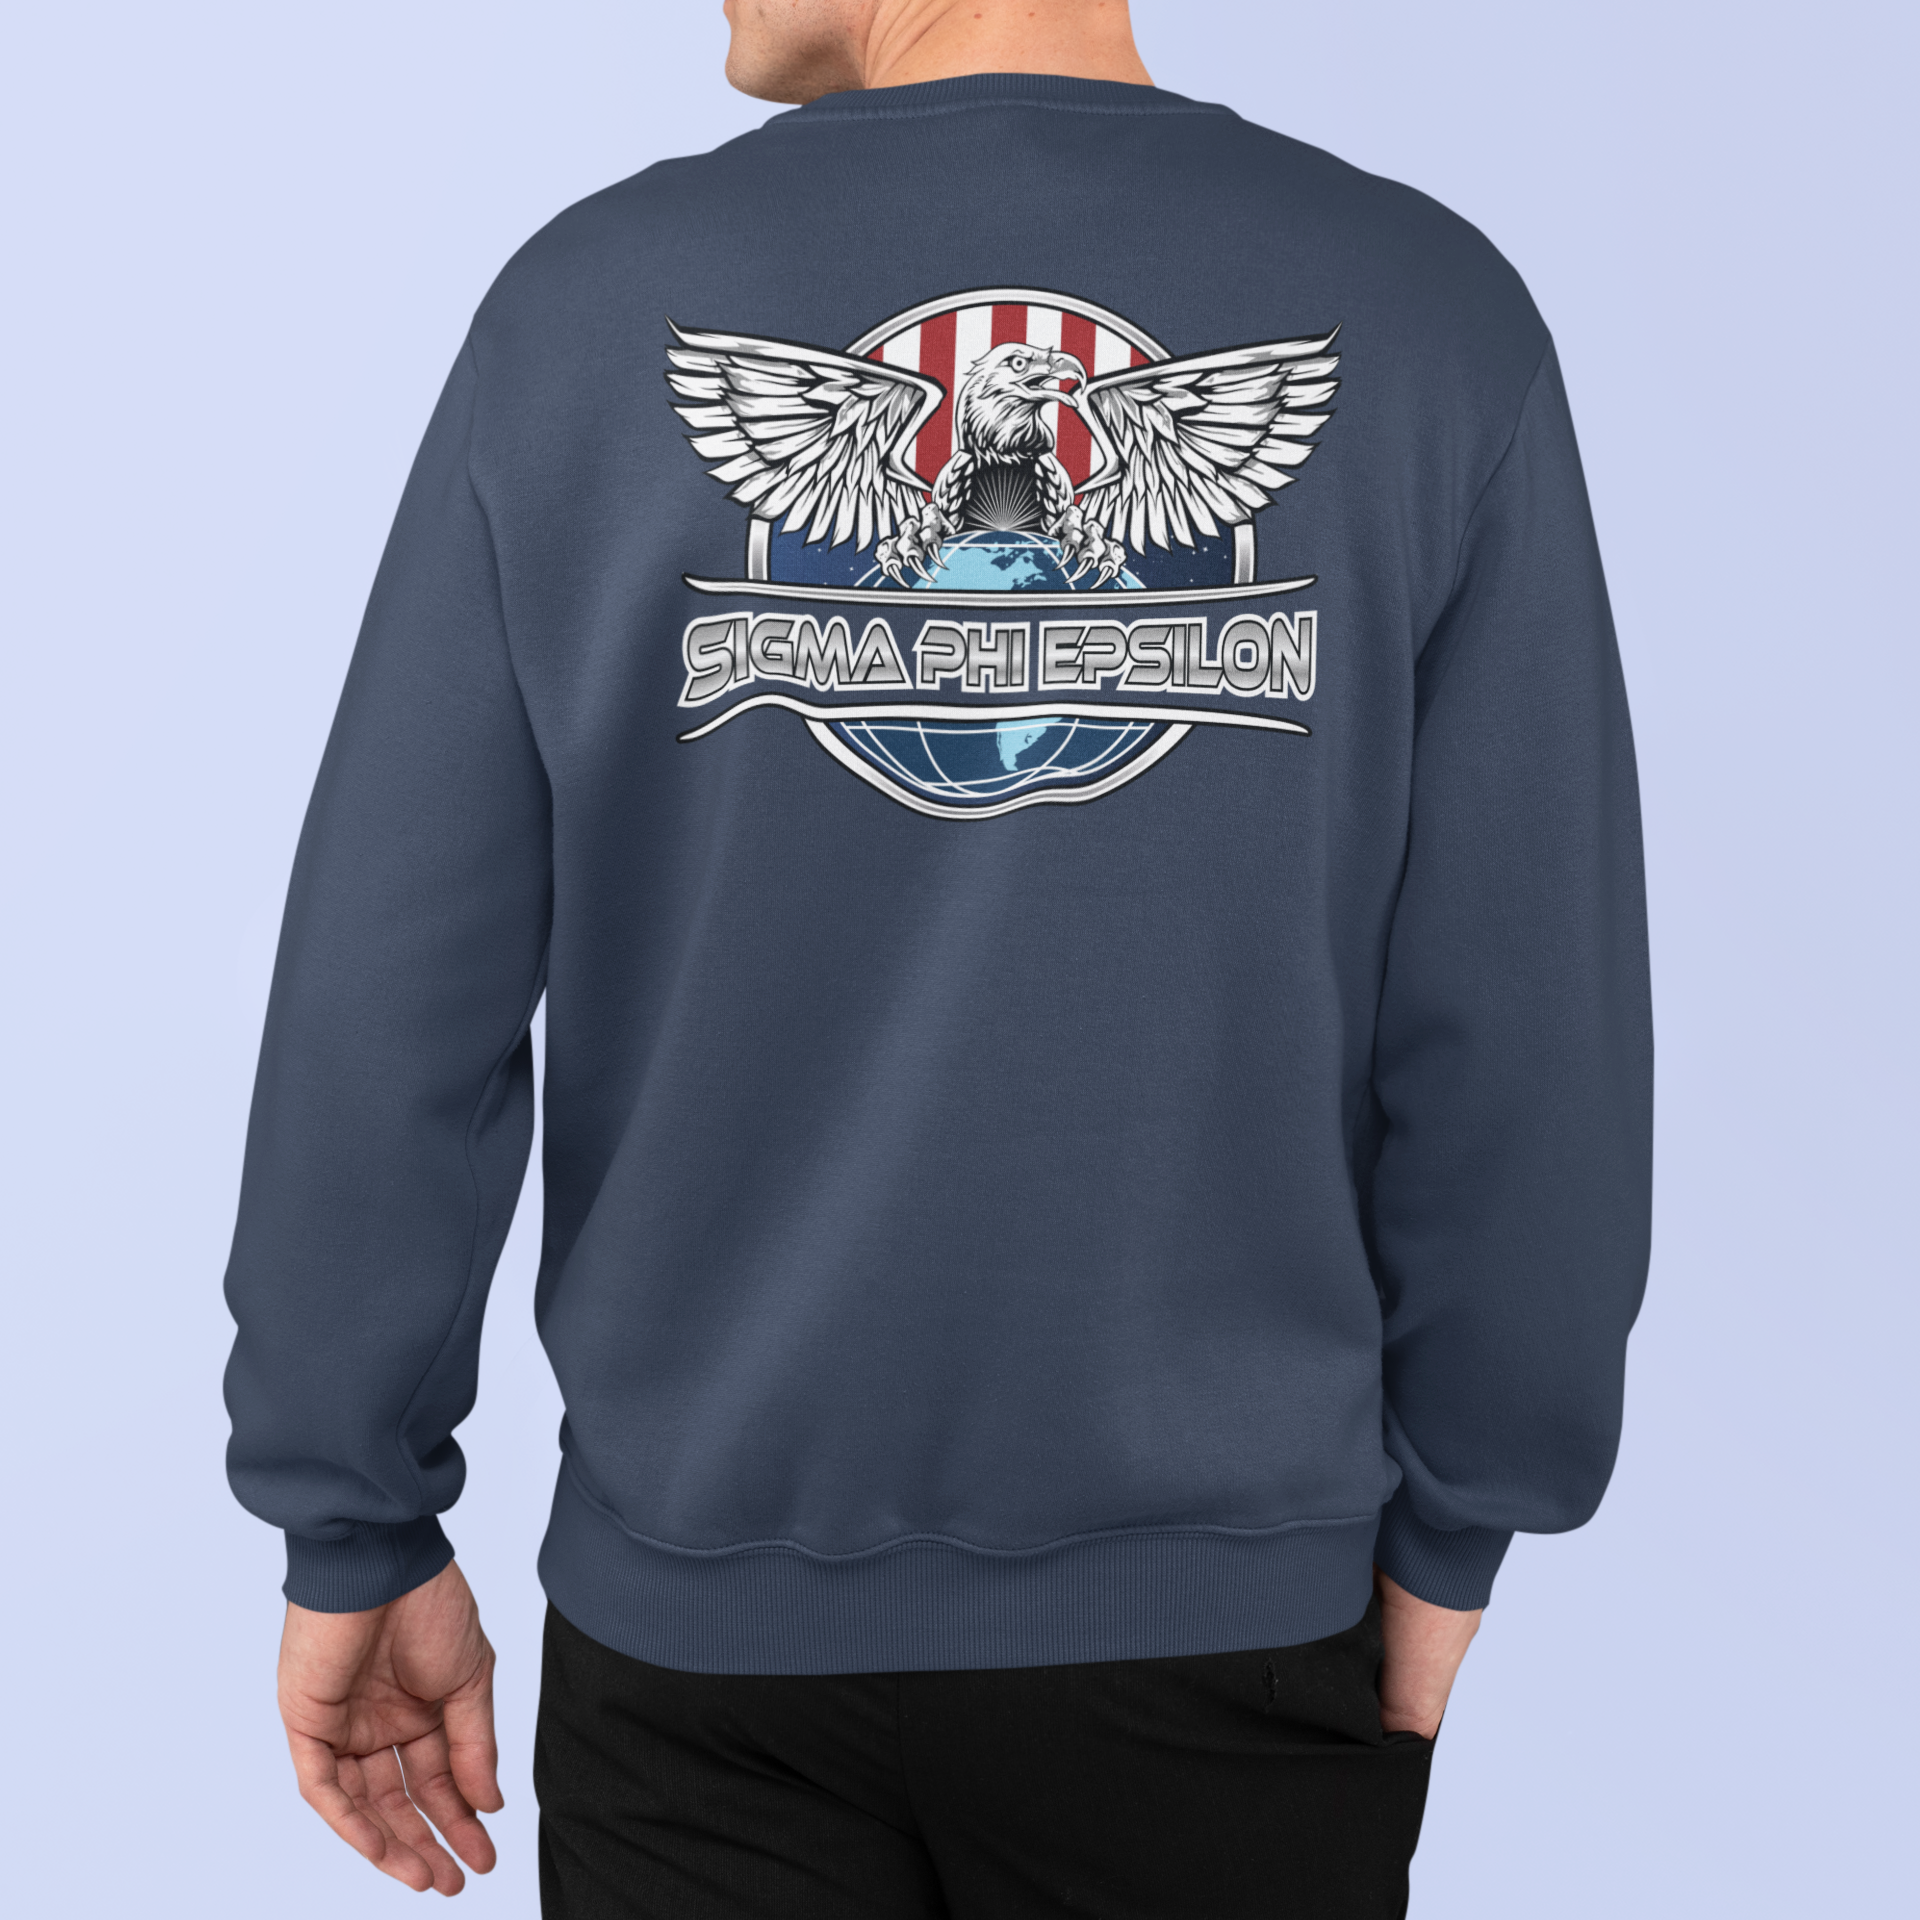 Sigma Phi Epsilon Graphic Crewneck Sweatshirt | The Fraternal Order | SigEp Fraternity Clothes and Merchandise back model 